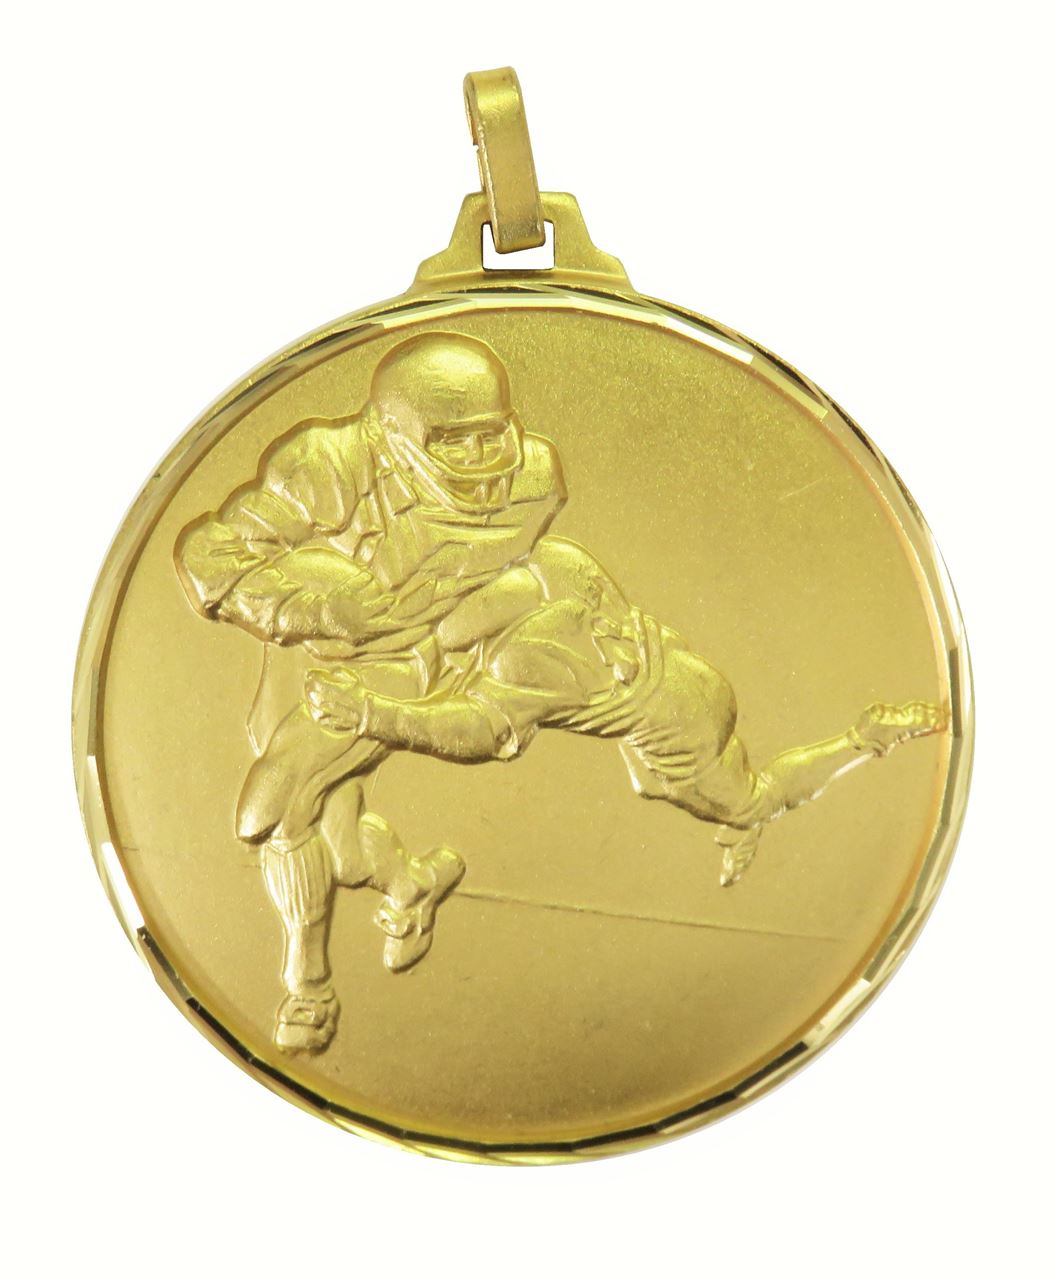 Gold Faceted American Football Medal (size: 52mm) - 282F